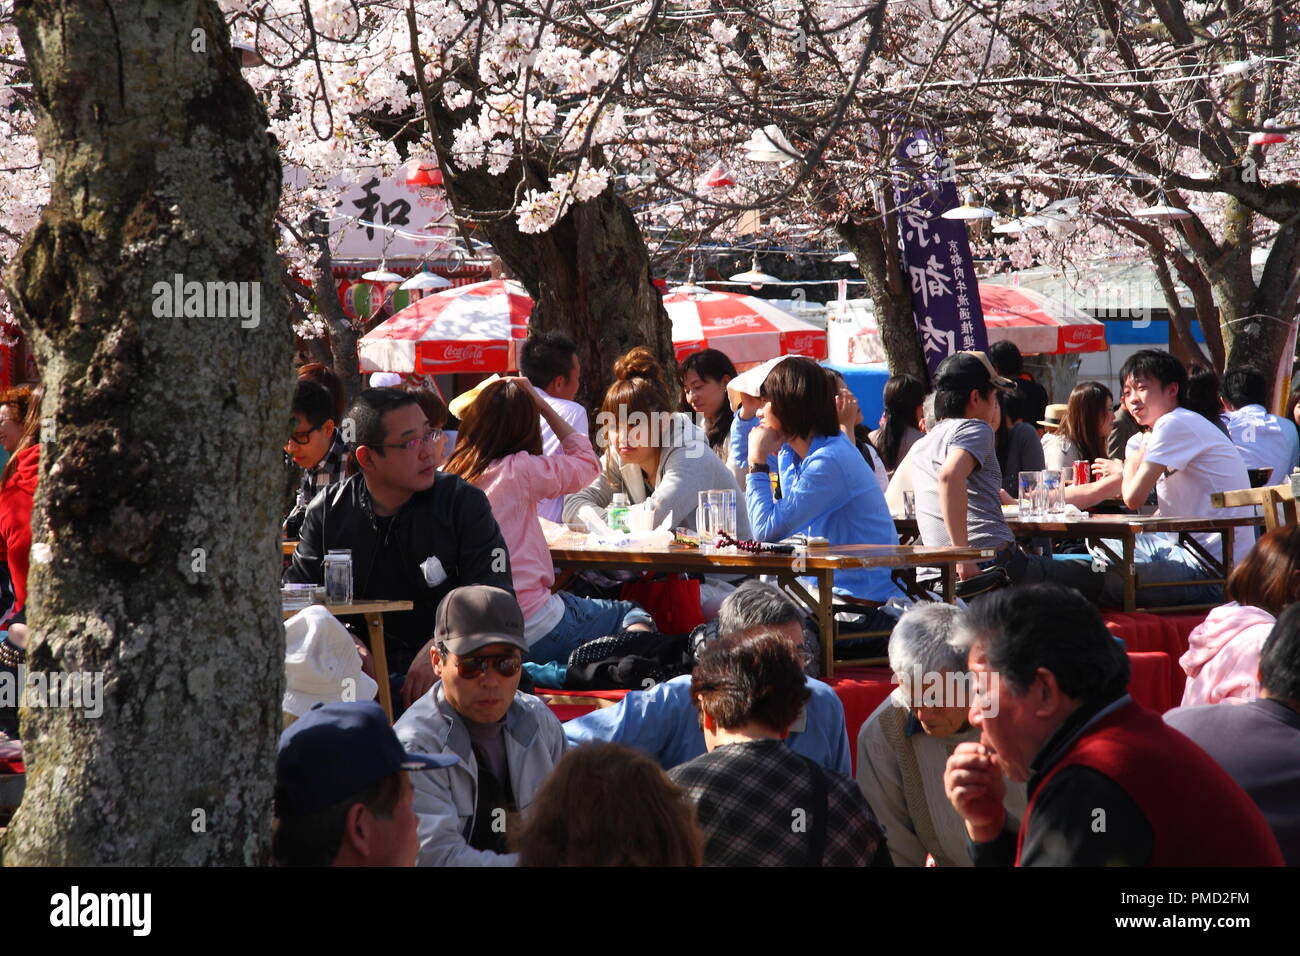 Japanese people gather in Maruyama Park in Kyoto, Japan to celebrate 'hanami', the Cherry blossom. Stock Photo